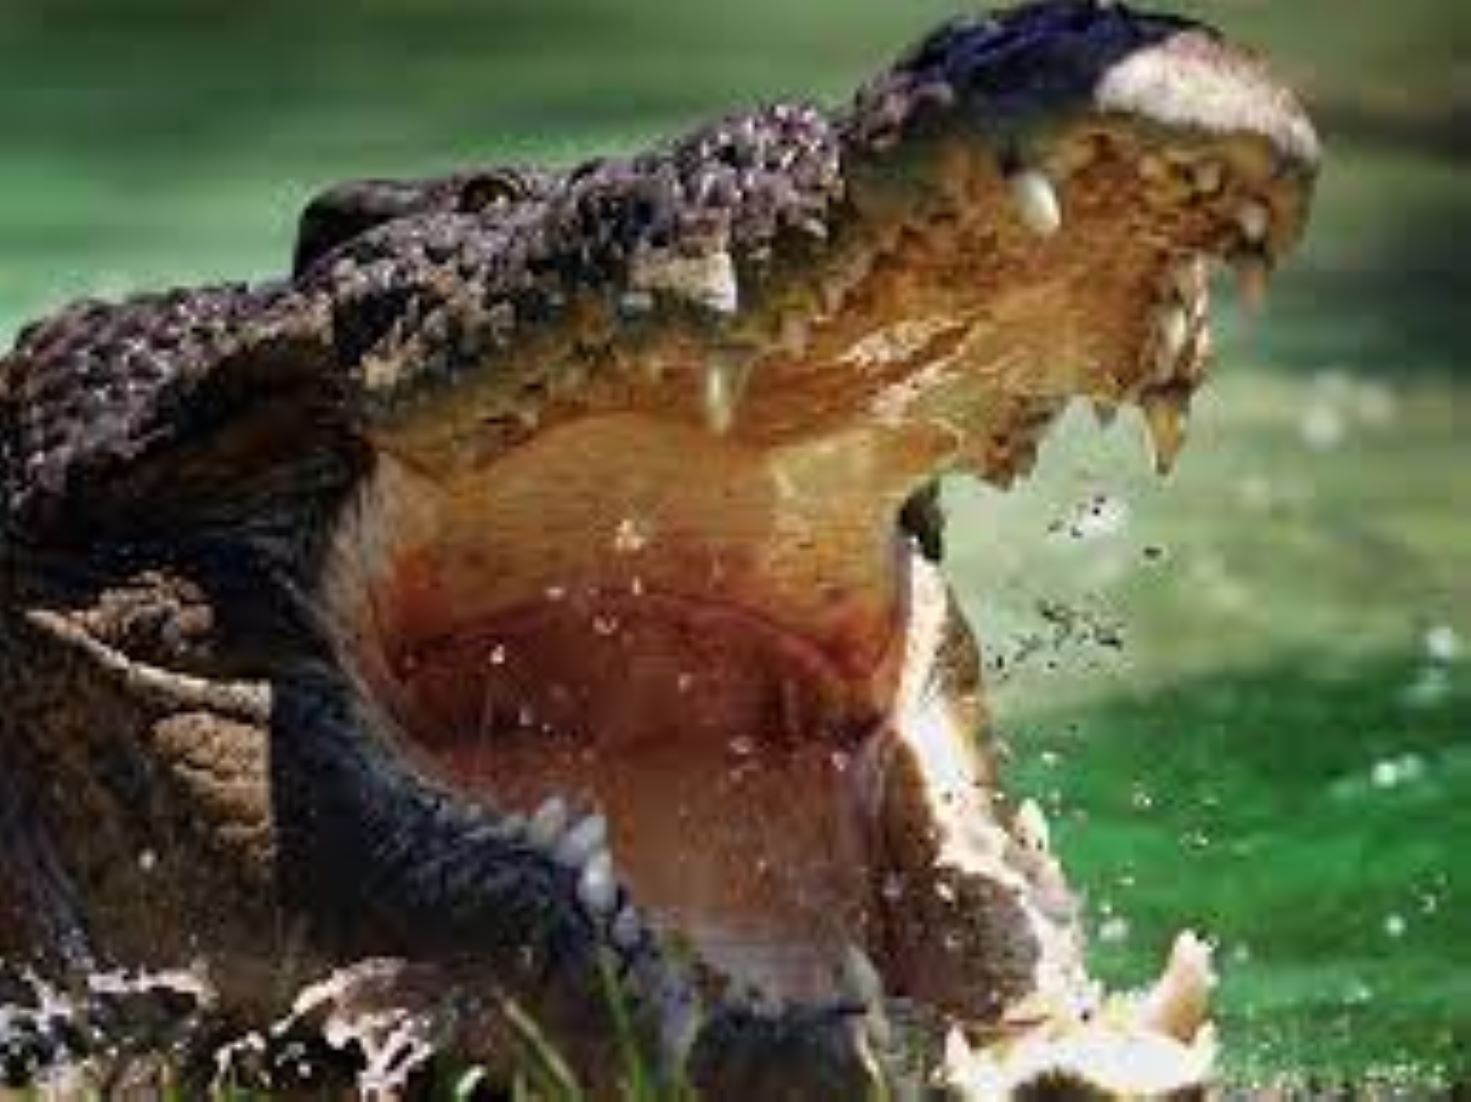 Australian Teenager Fought Off Monster Crocodile Attack